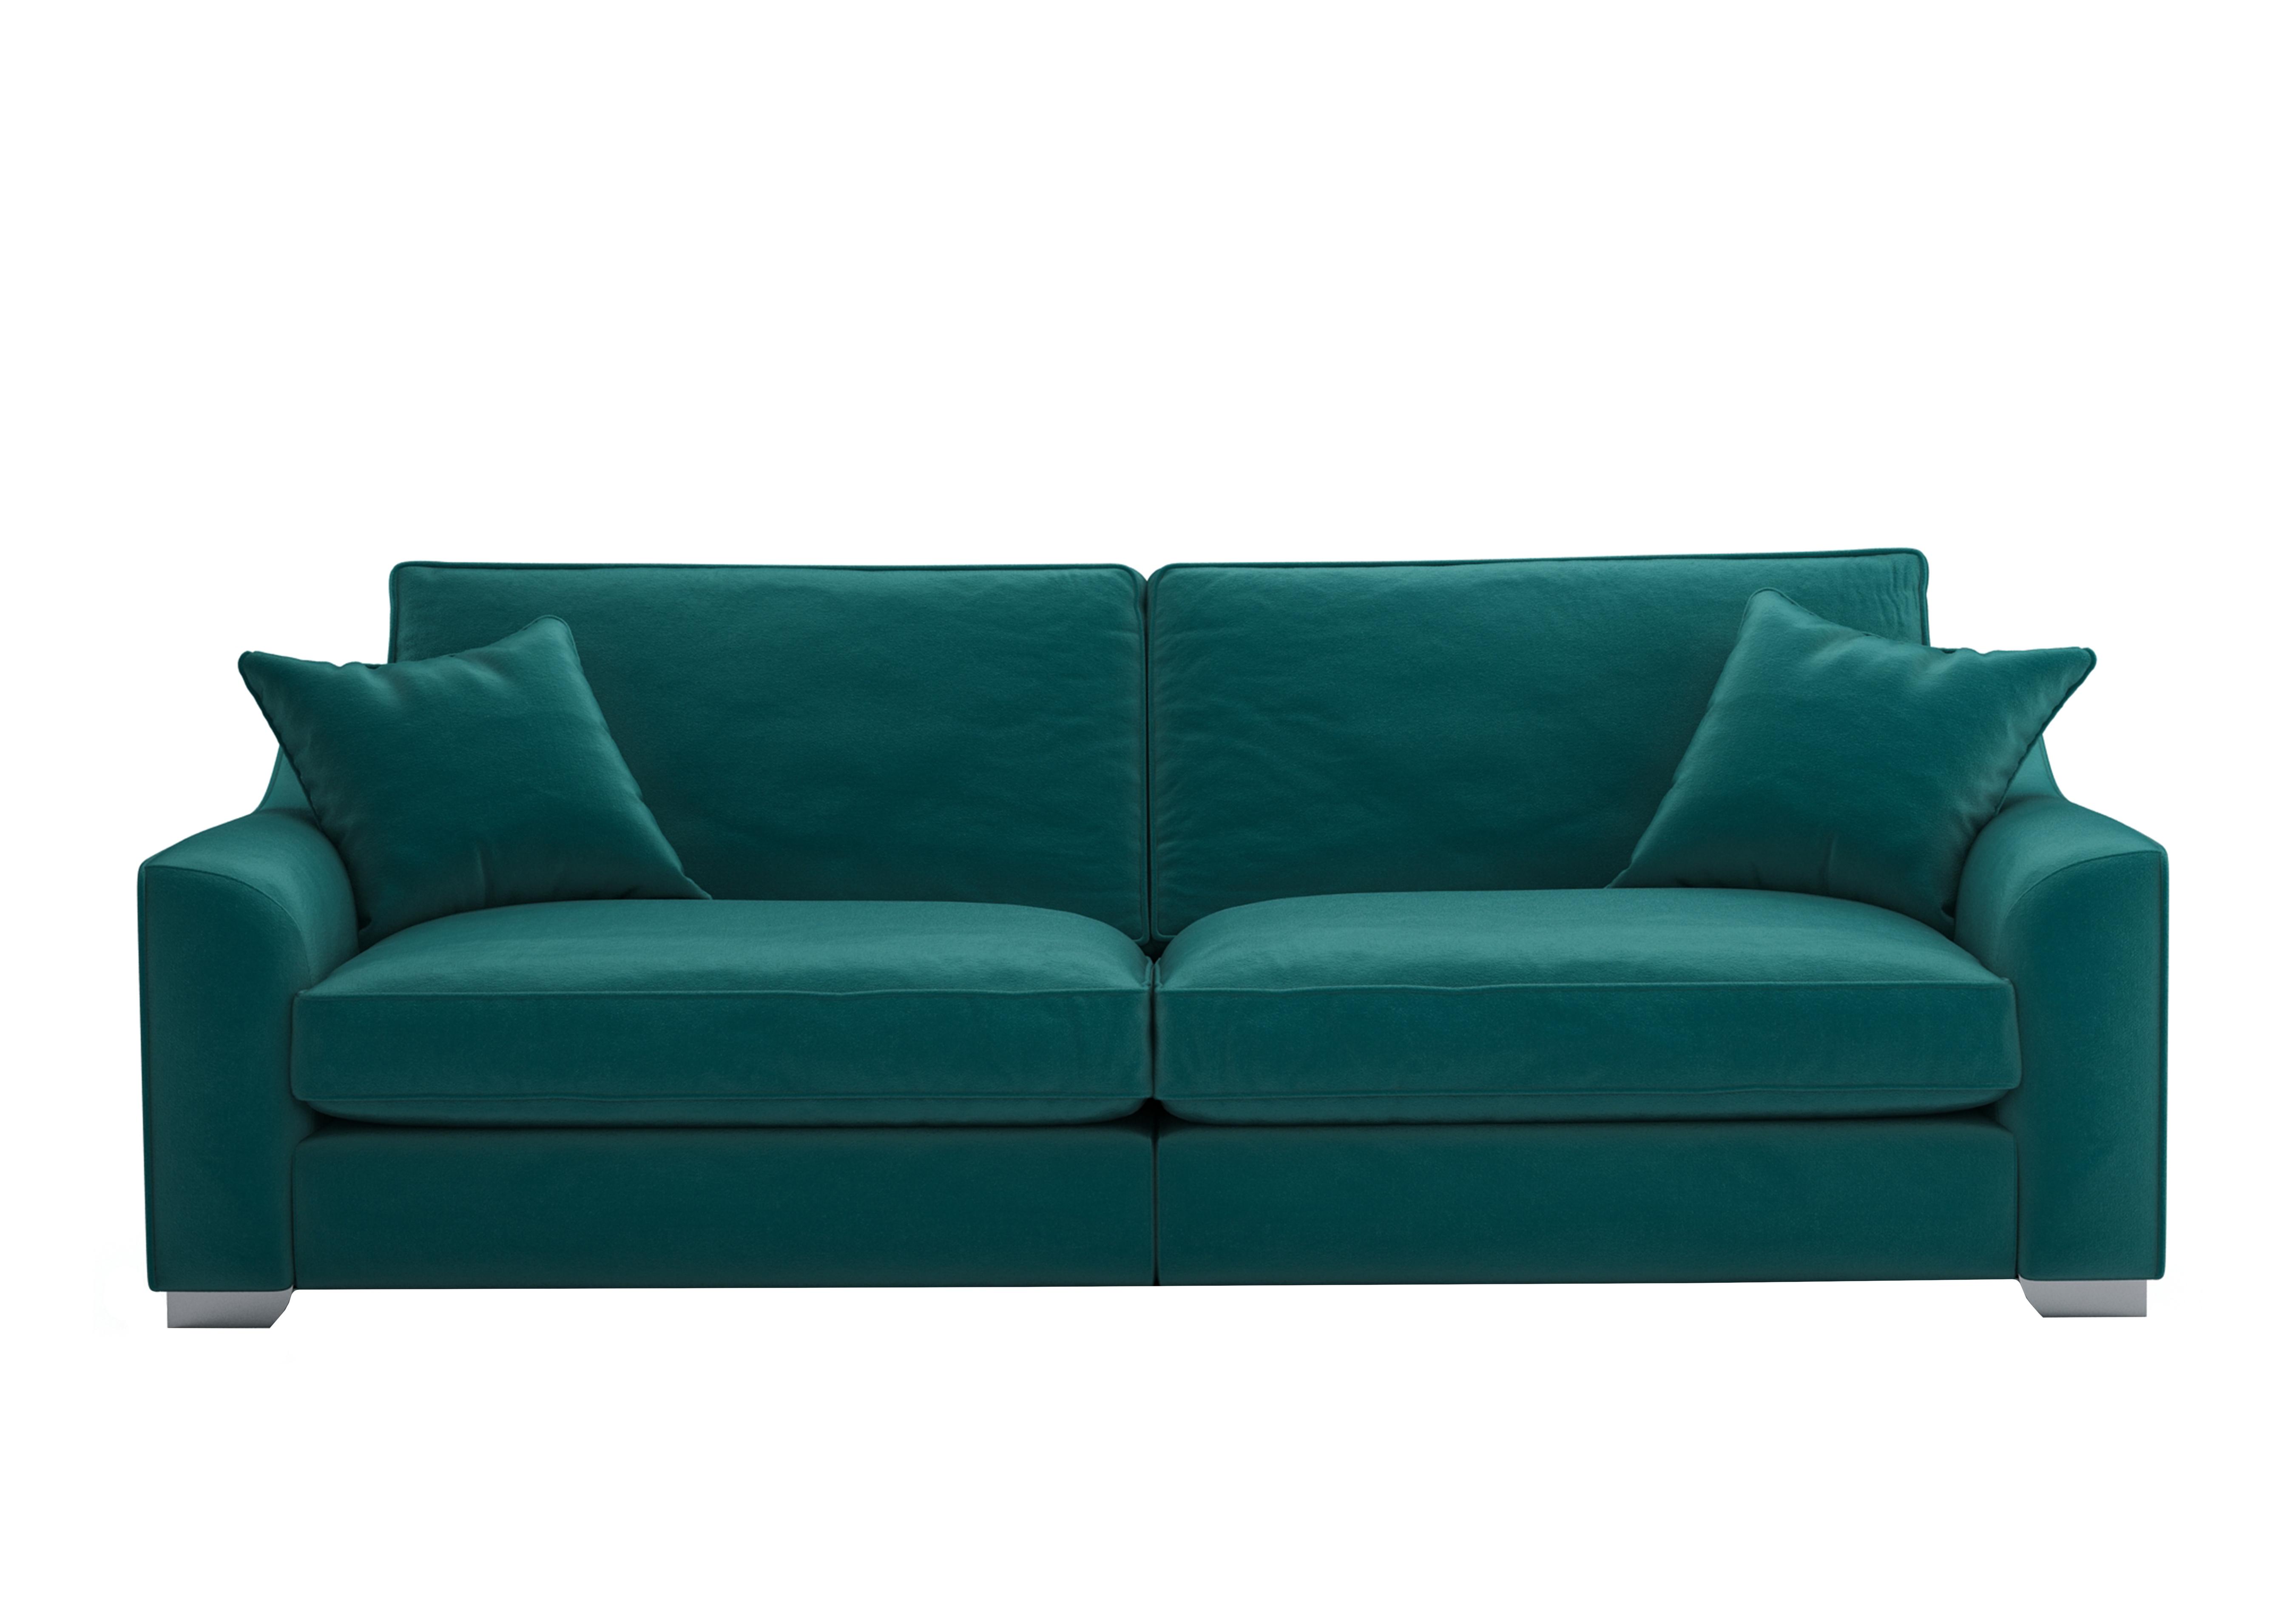 Isobel 4 Seater Fabric Sofa in Dra008 Dragoneye Ch Ft on Furniture Village